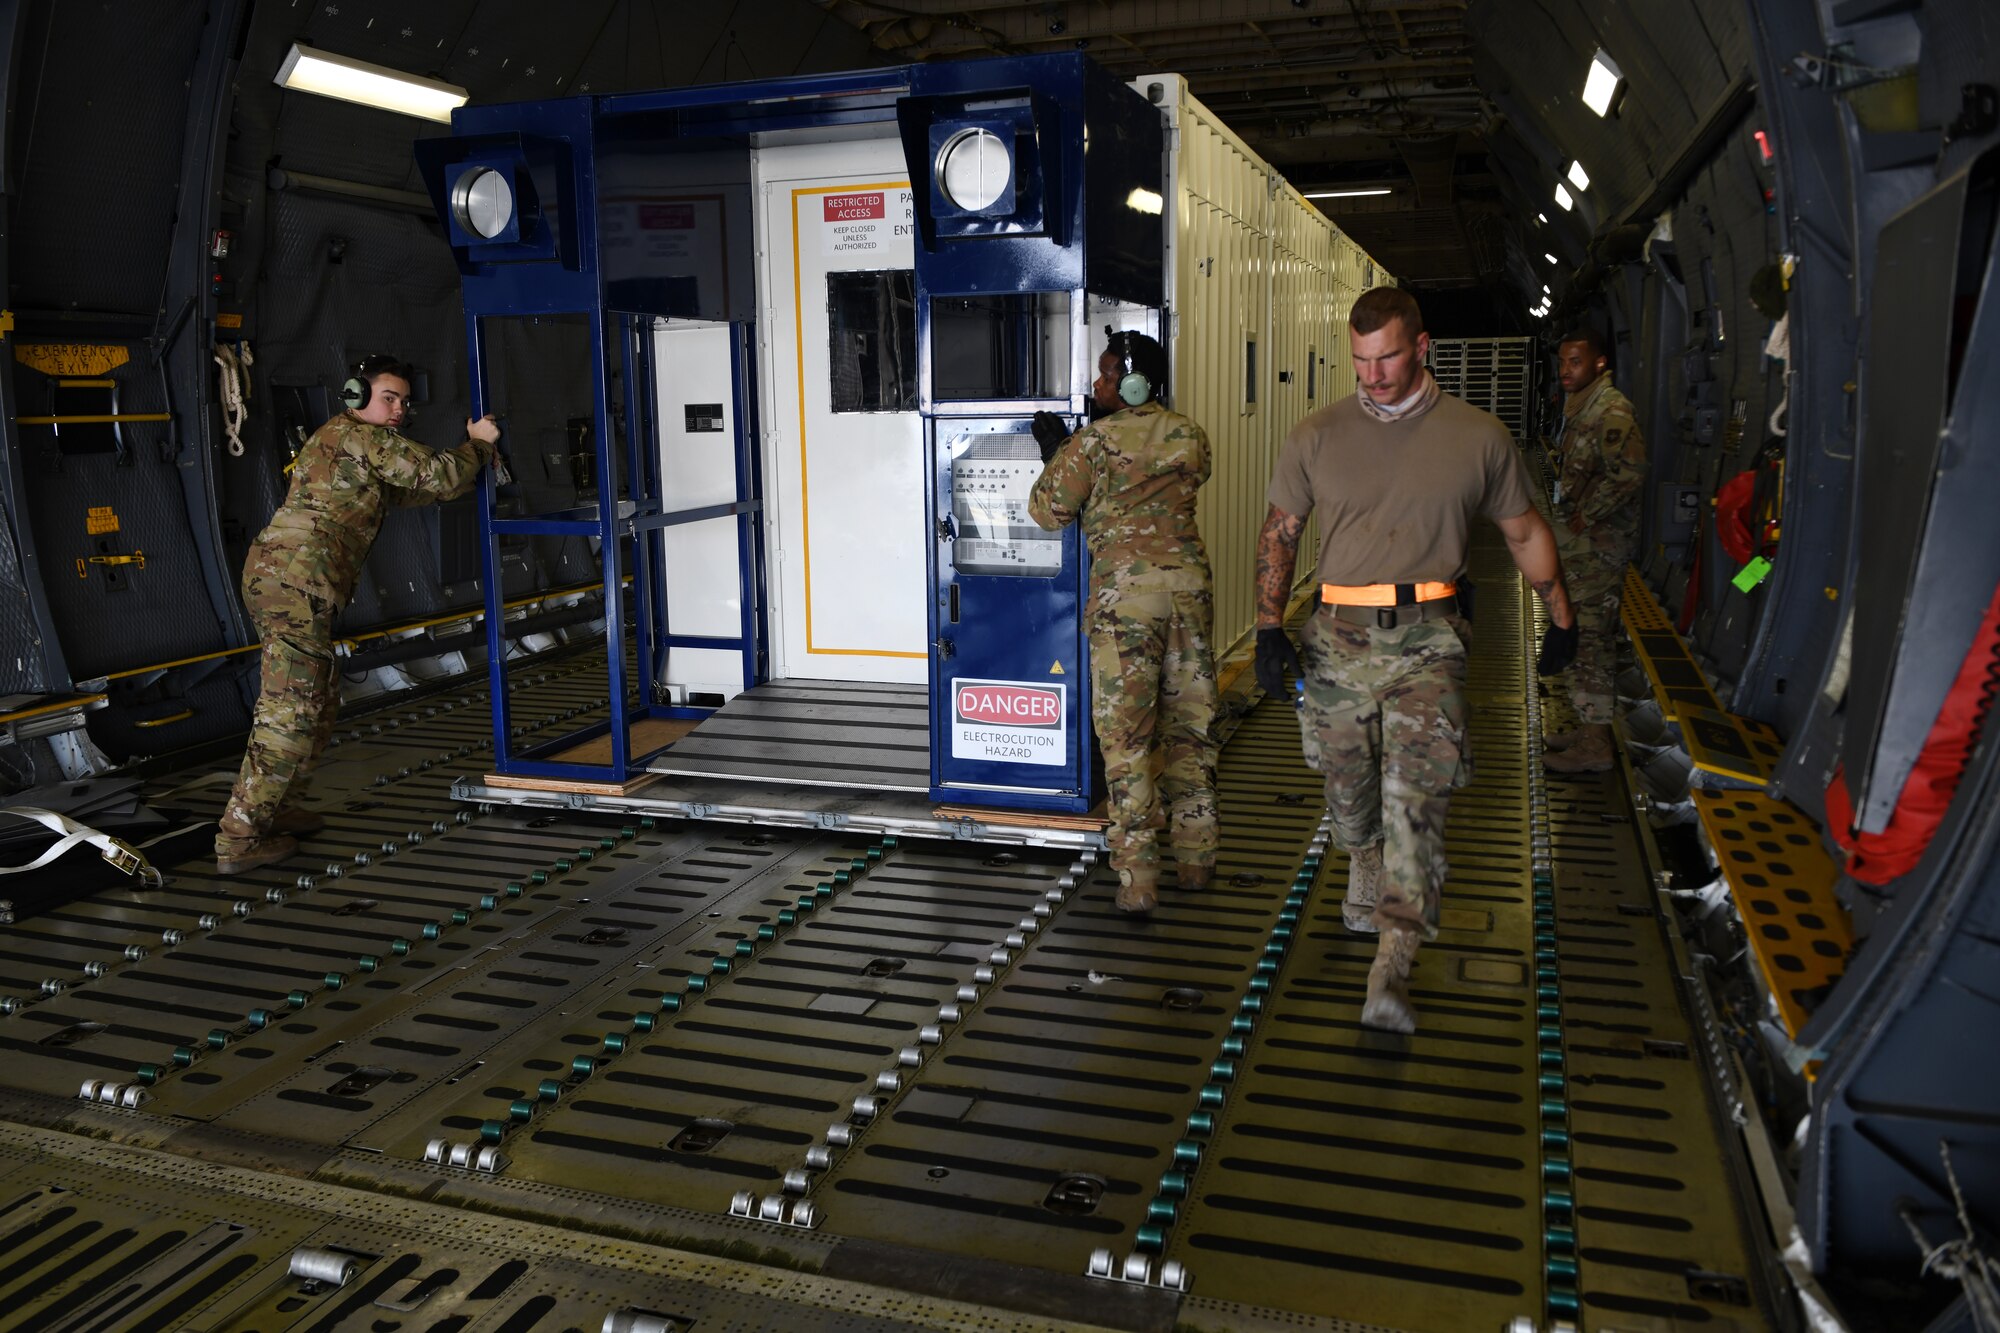 Airmen prepare to off load a specialized medical container designed to transport individuals with infectious diseases at Al Udeid Air Base, Qatar, Sept. 18, 2020. The Negatively Pressurized Conex, or NPC, is configured for the C-17 Globemaster III and C-5 Super Galaxy aircraft to safely transport up to 28 passengers or 23 patients, including ambulatory and litter, around the globe. (U.S. Air Force photo by Staff Sgt. Kayla White)